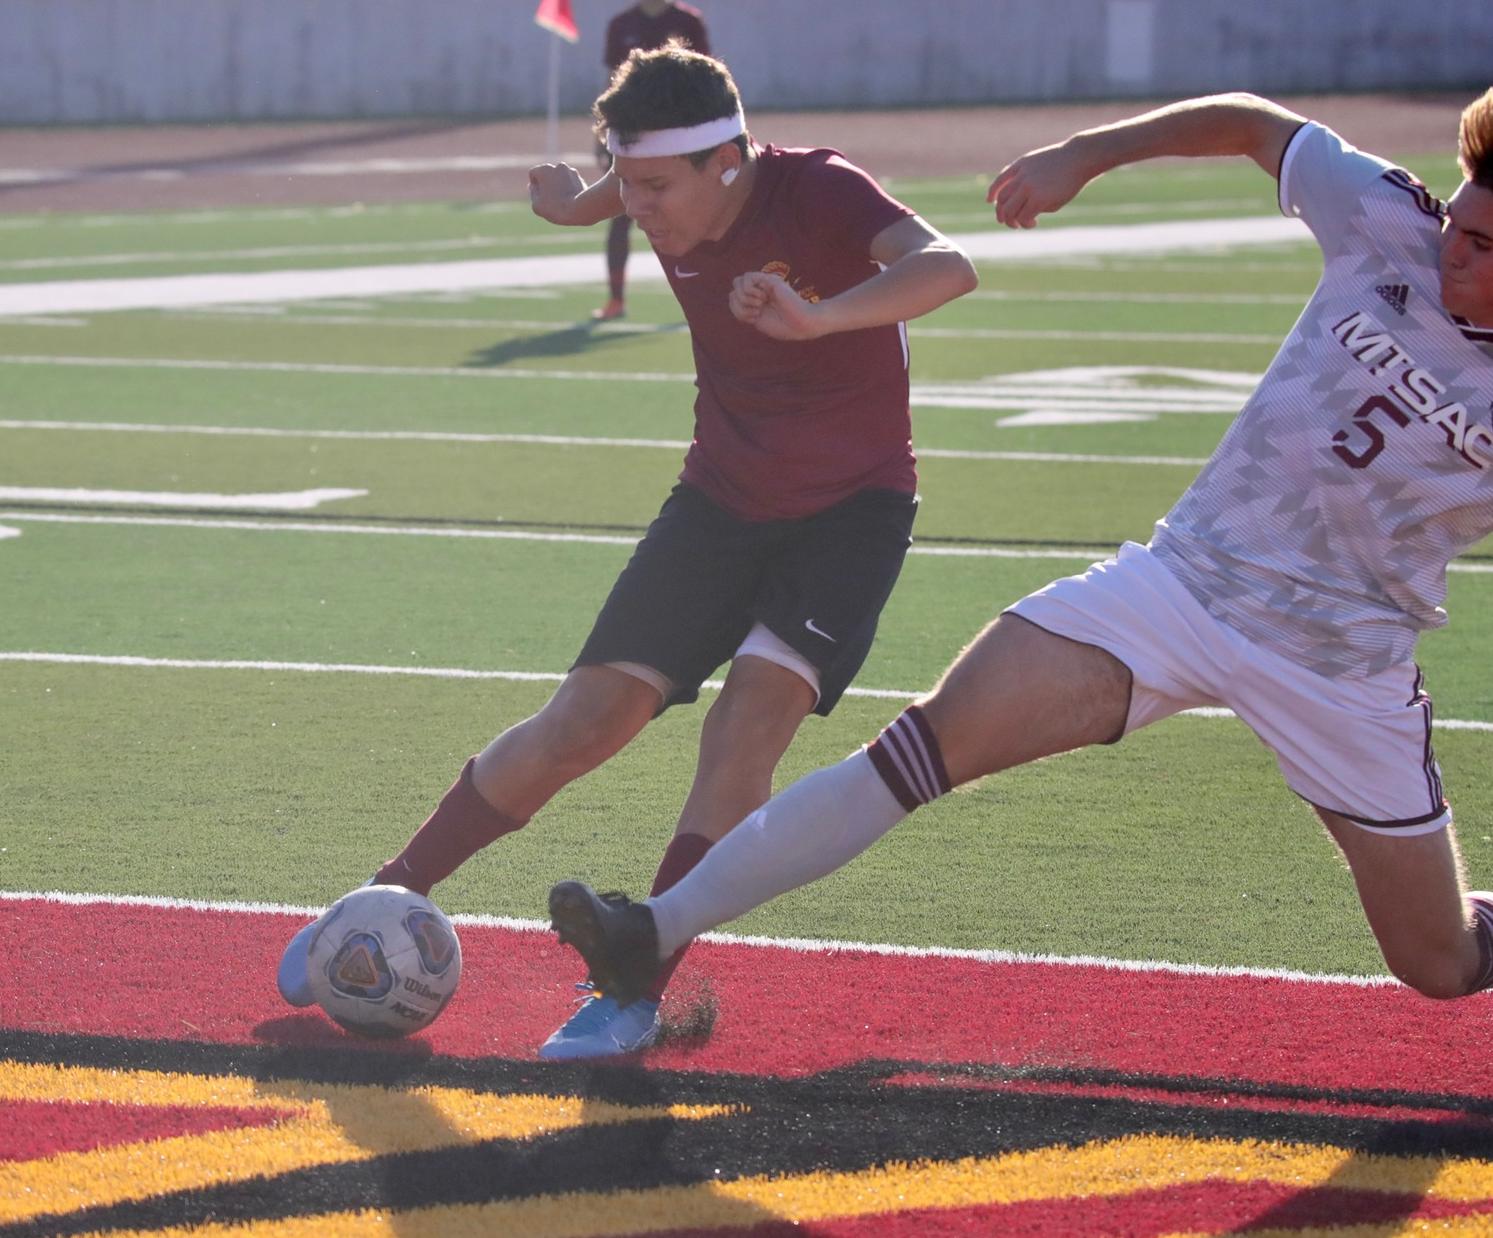 Martin Manzanilla is another key returner from the '19 Lancers and scored a goal in Tuesday's win.